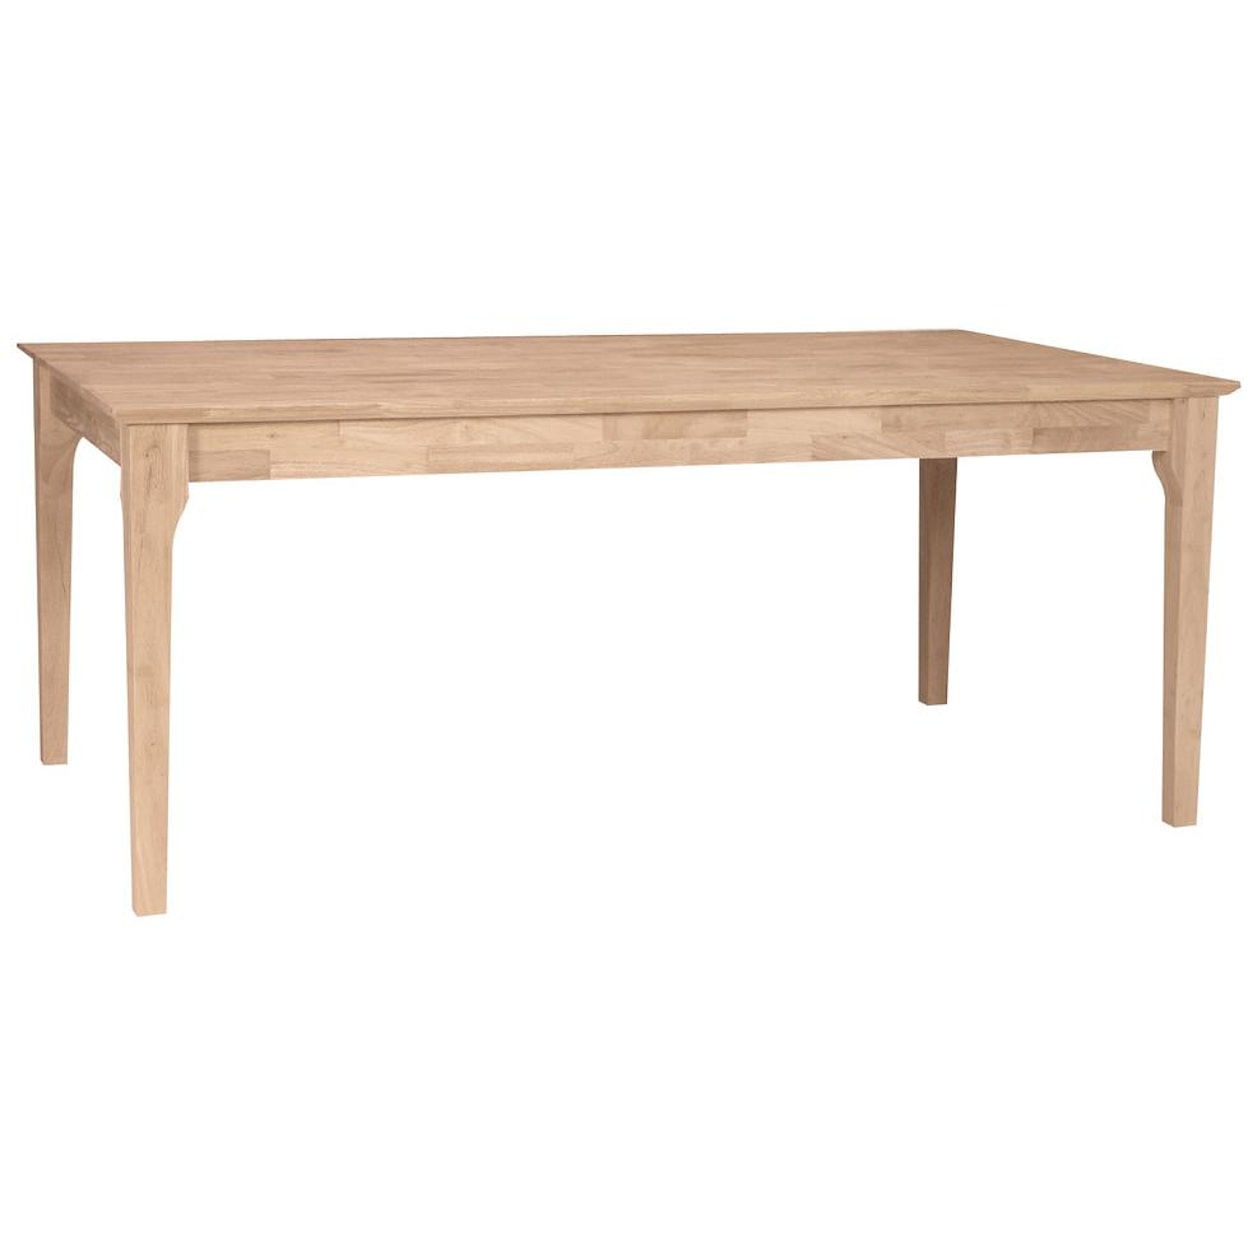 John Thomas SELECT Dining Room Solid Top Mission Table